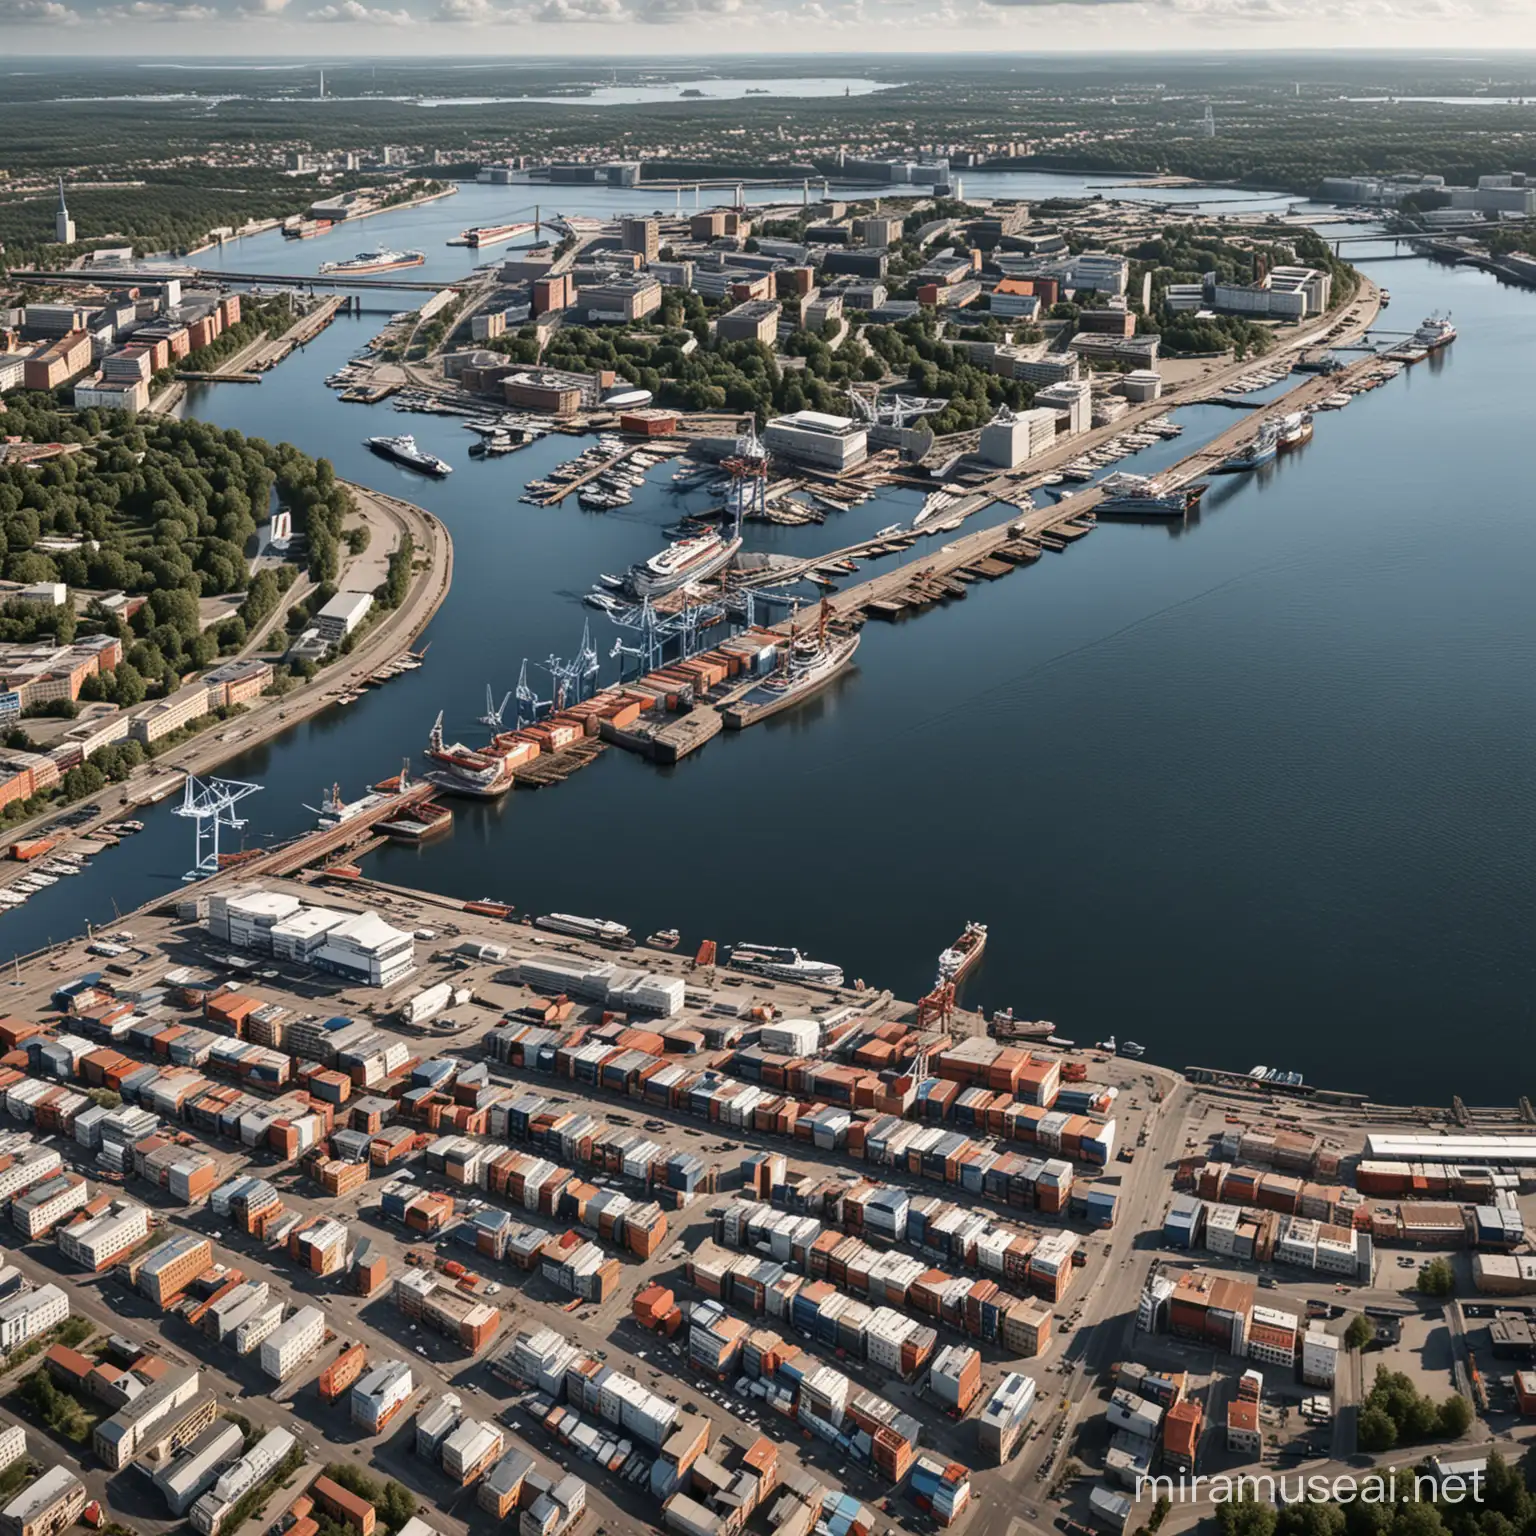 A photo-realistic picture of the port of Turku in Finland